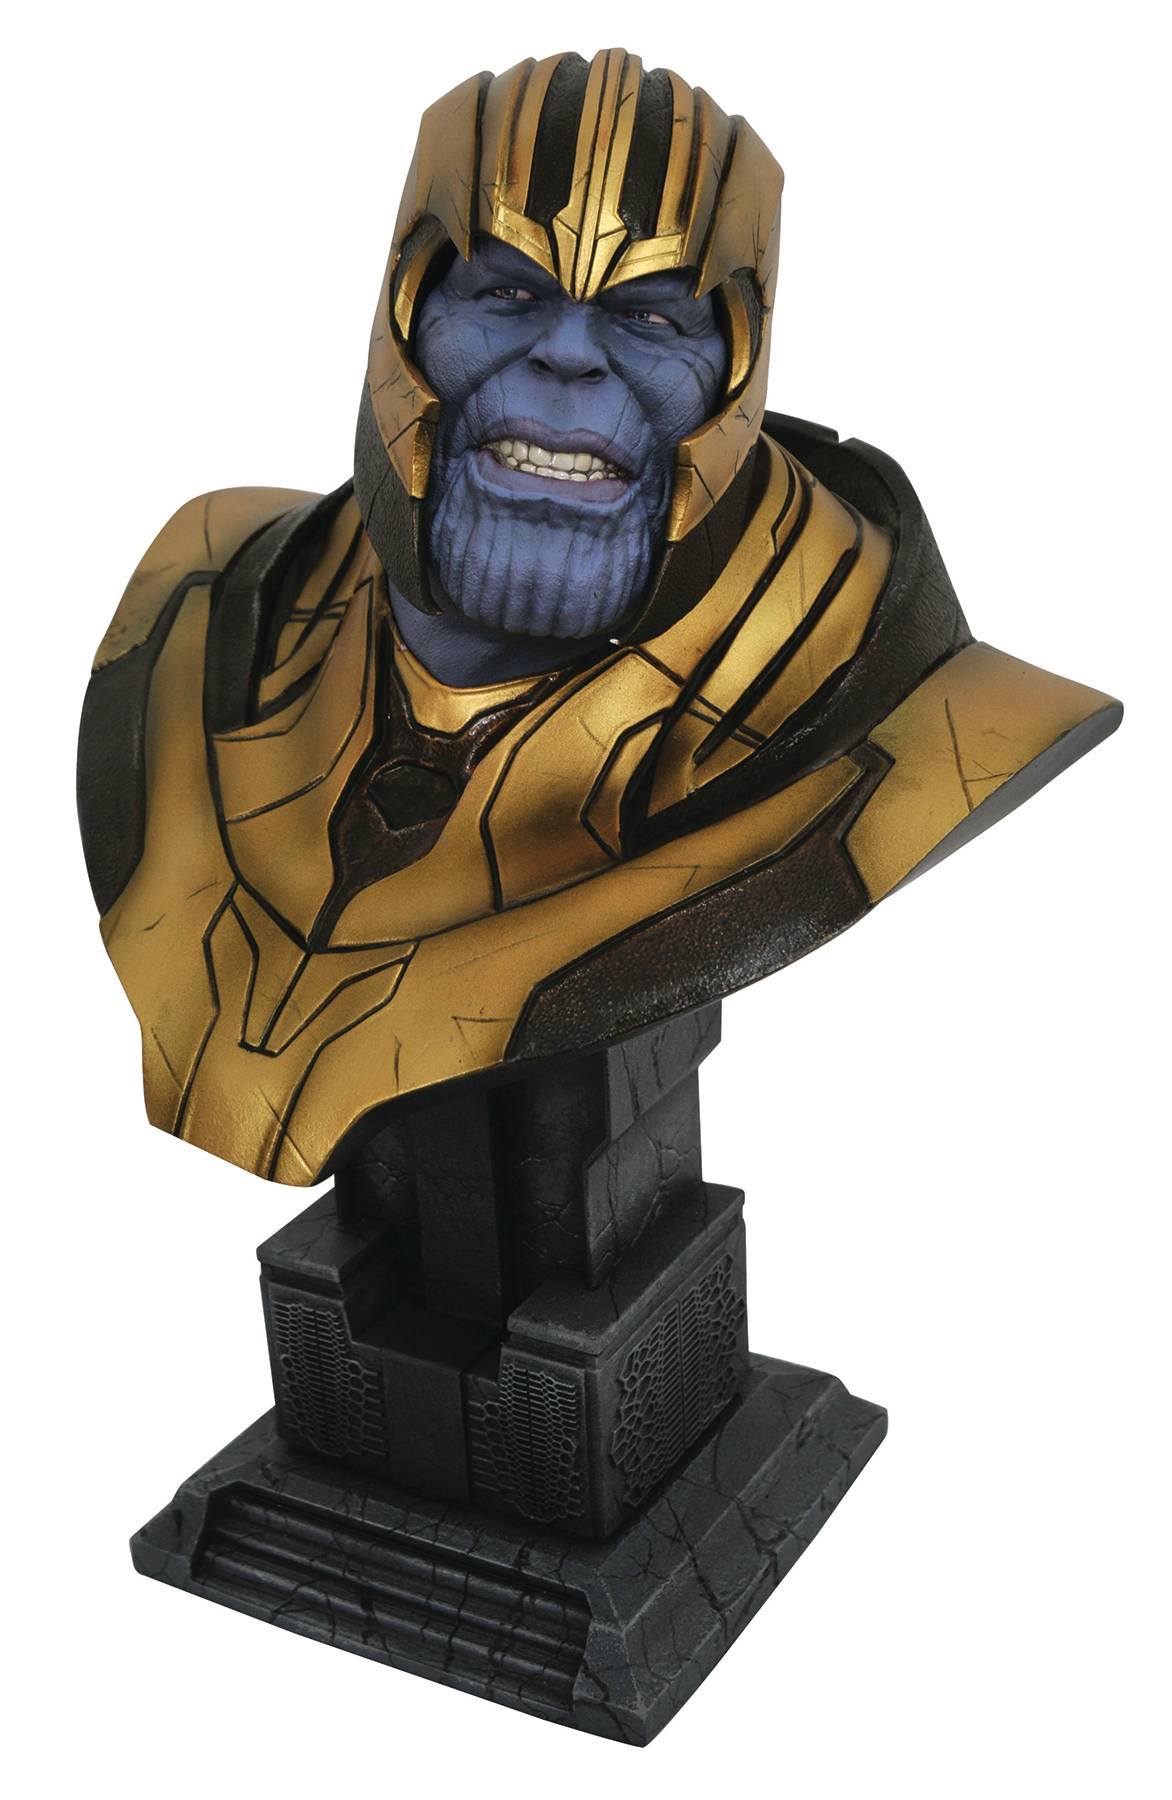 LEGENDS IN 3D MARVEL AVENGERS 4 THANOS 1/2 SCALE BUST